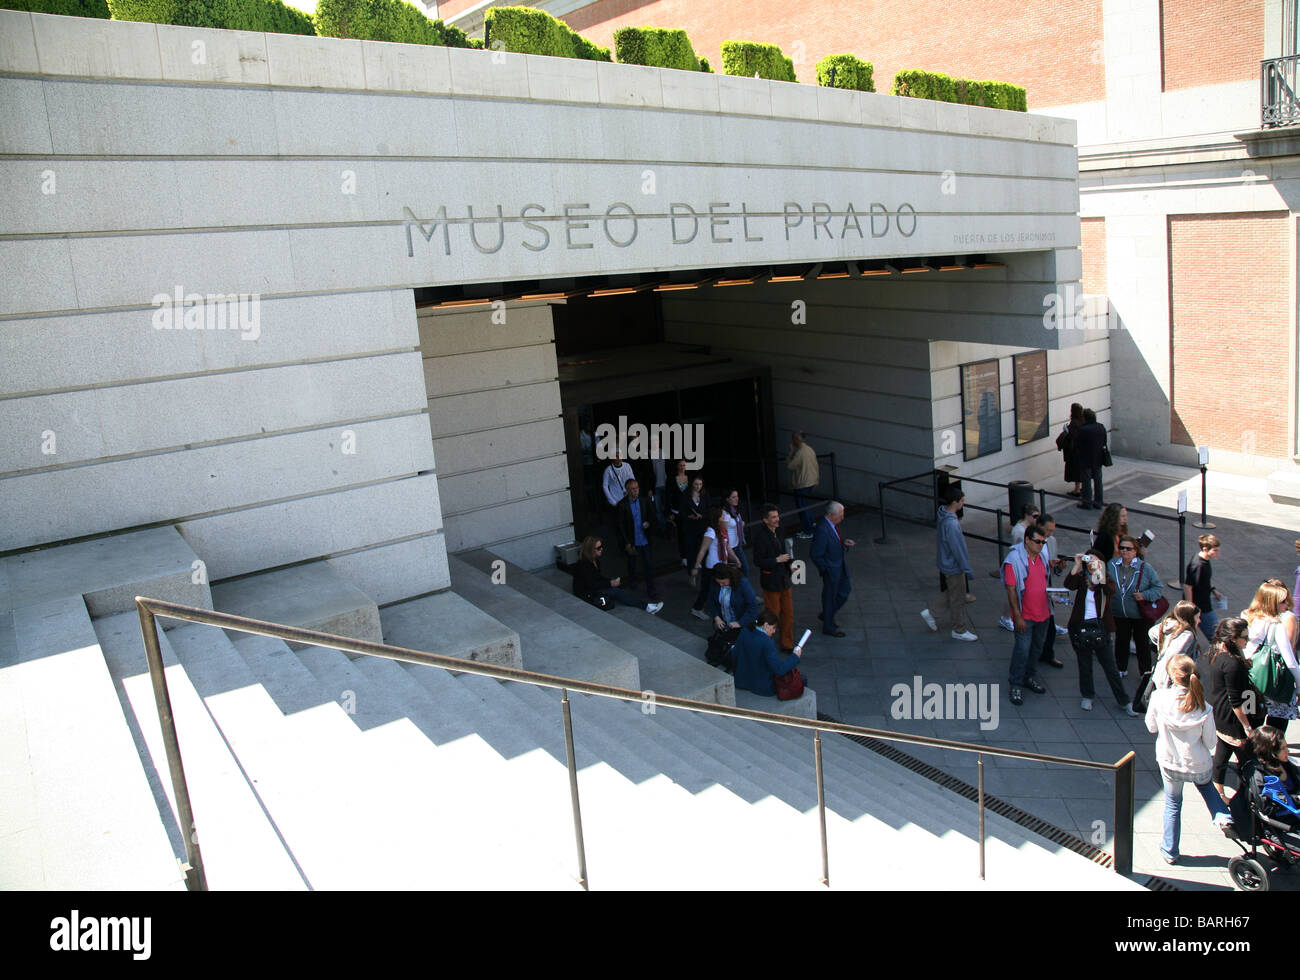 Crowds at the entrance to Museo del Prado, Madrid, Spain Stock Photo